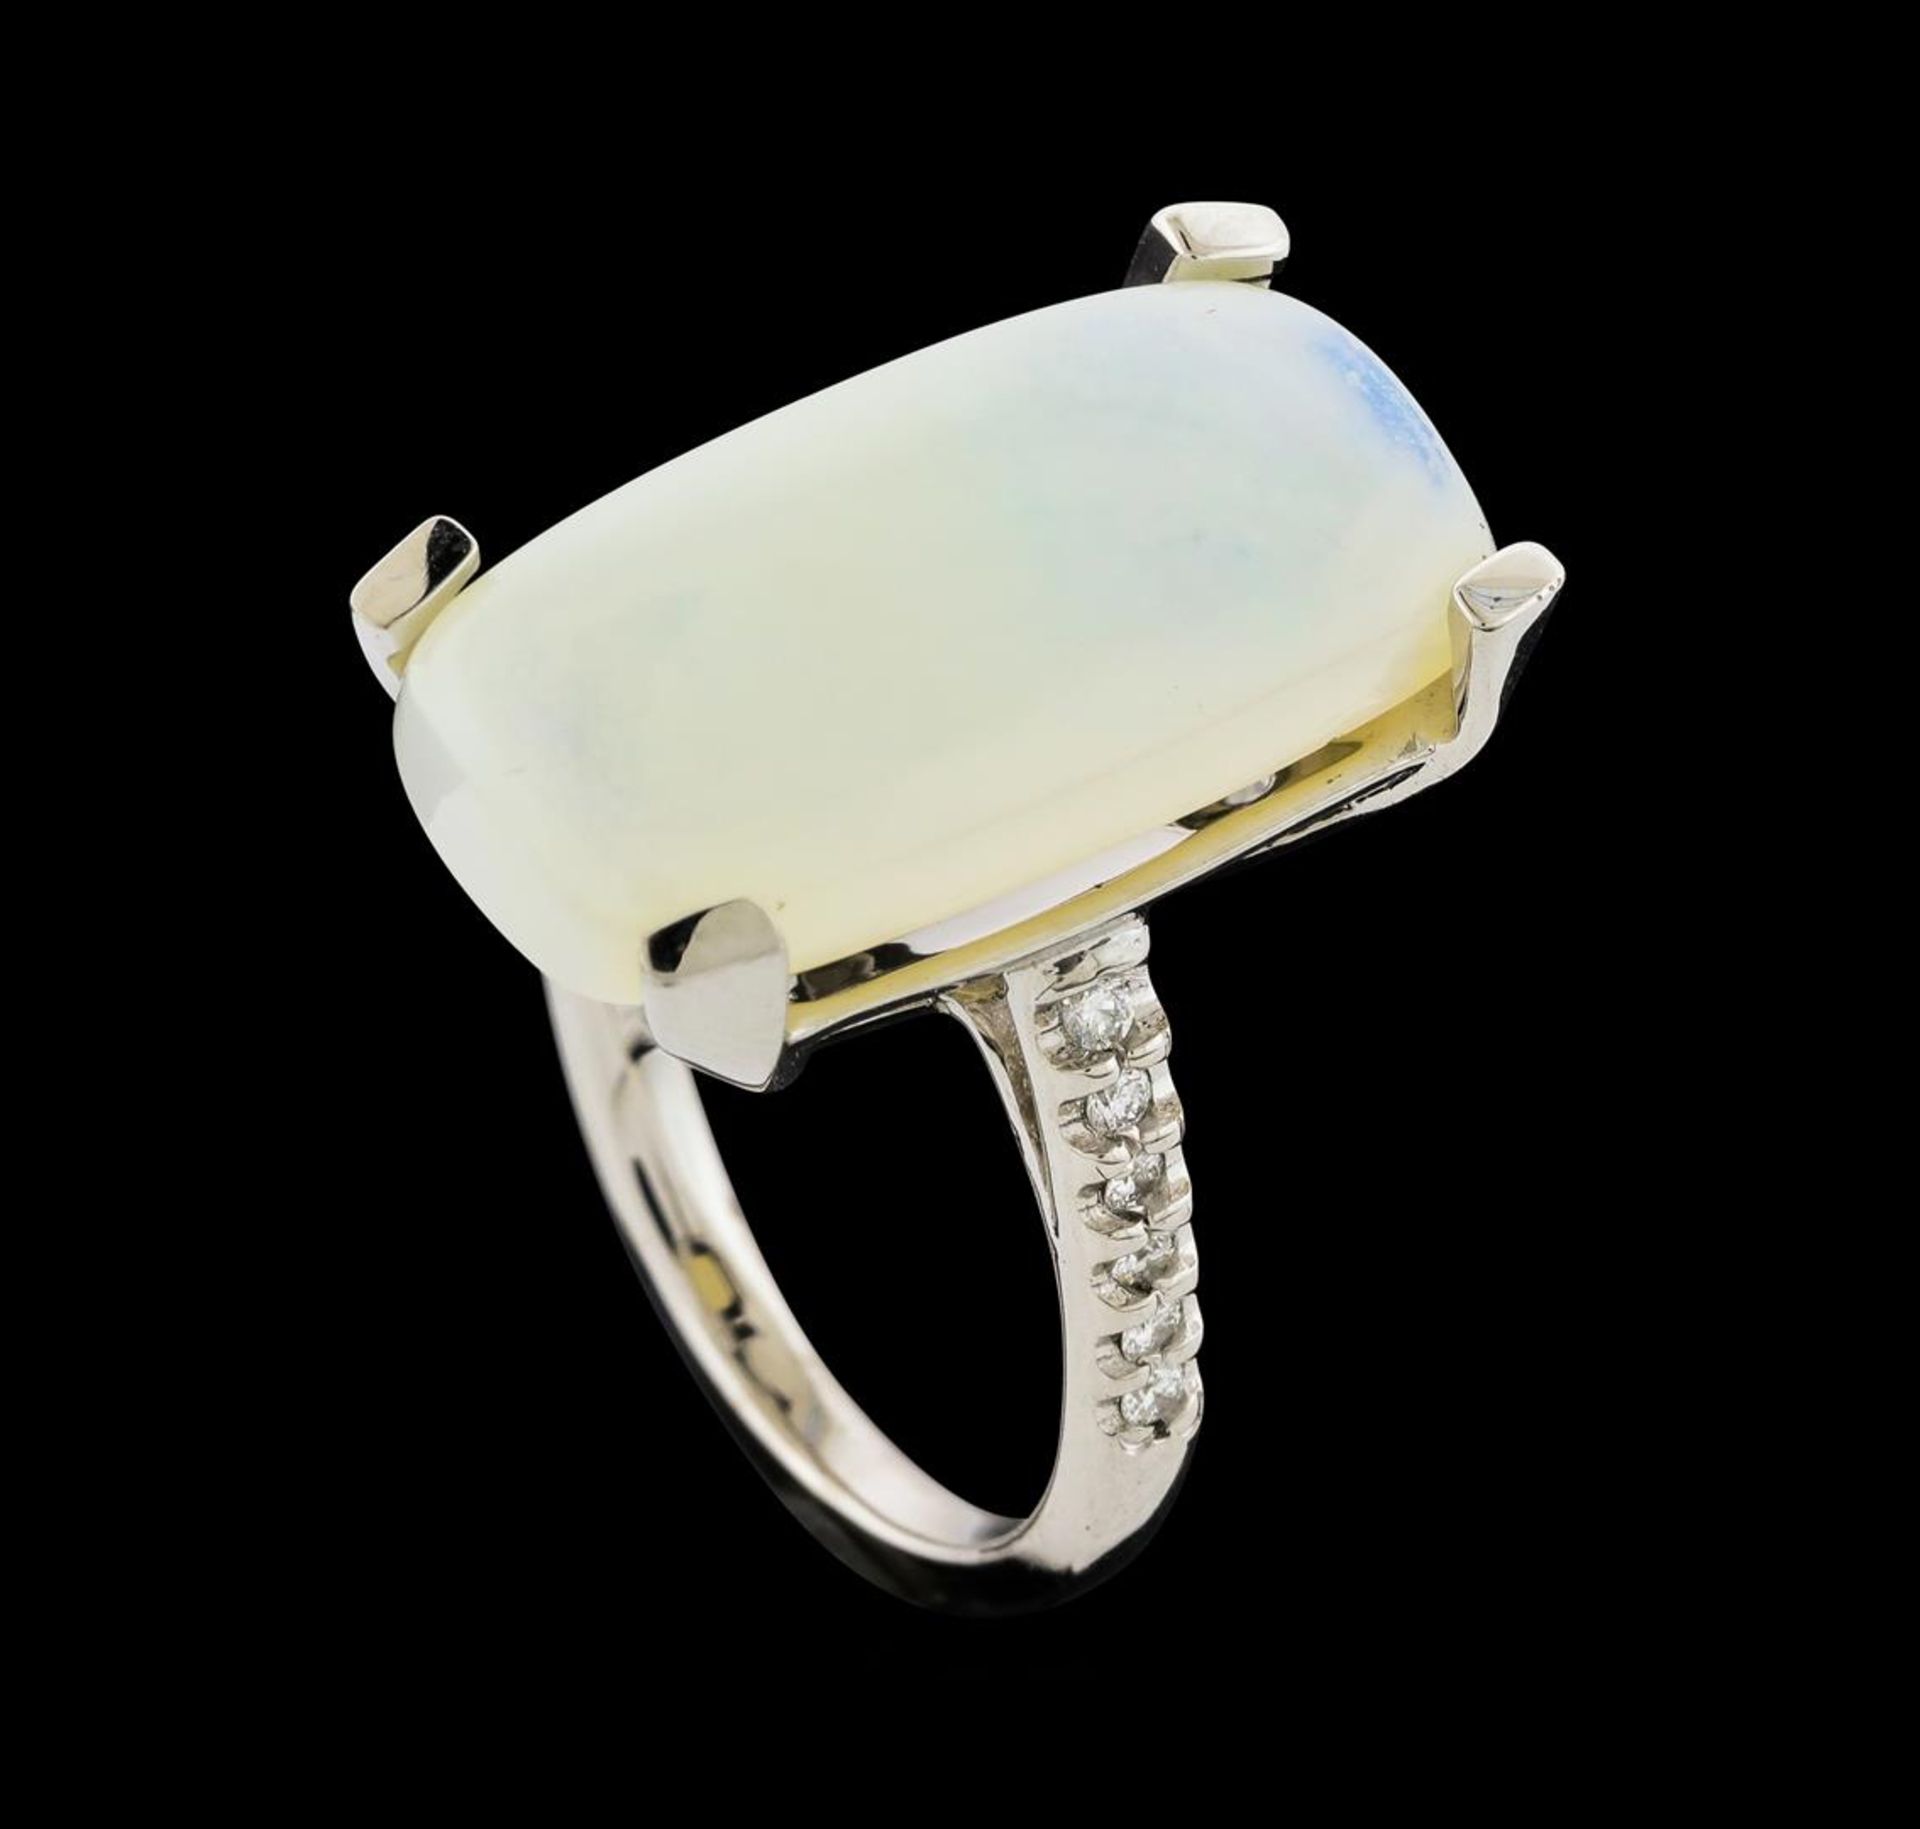 7.50 ctw Opal and Diamond Ring - 14KT White Gold - Image 4 of 4